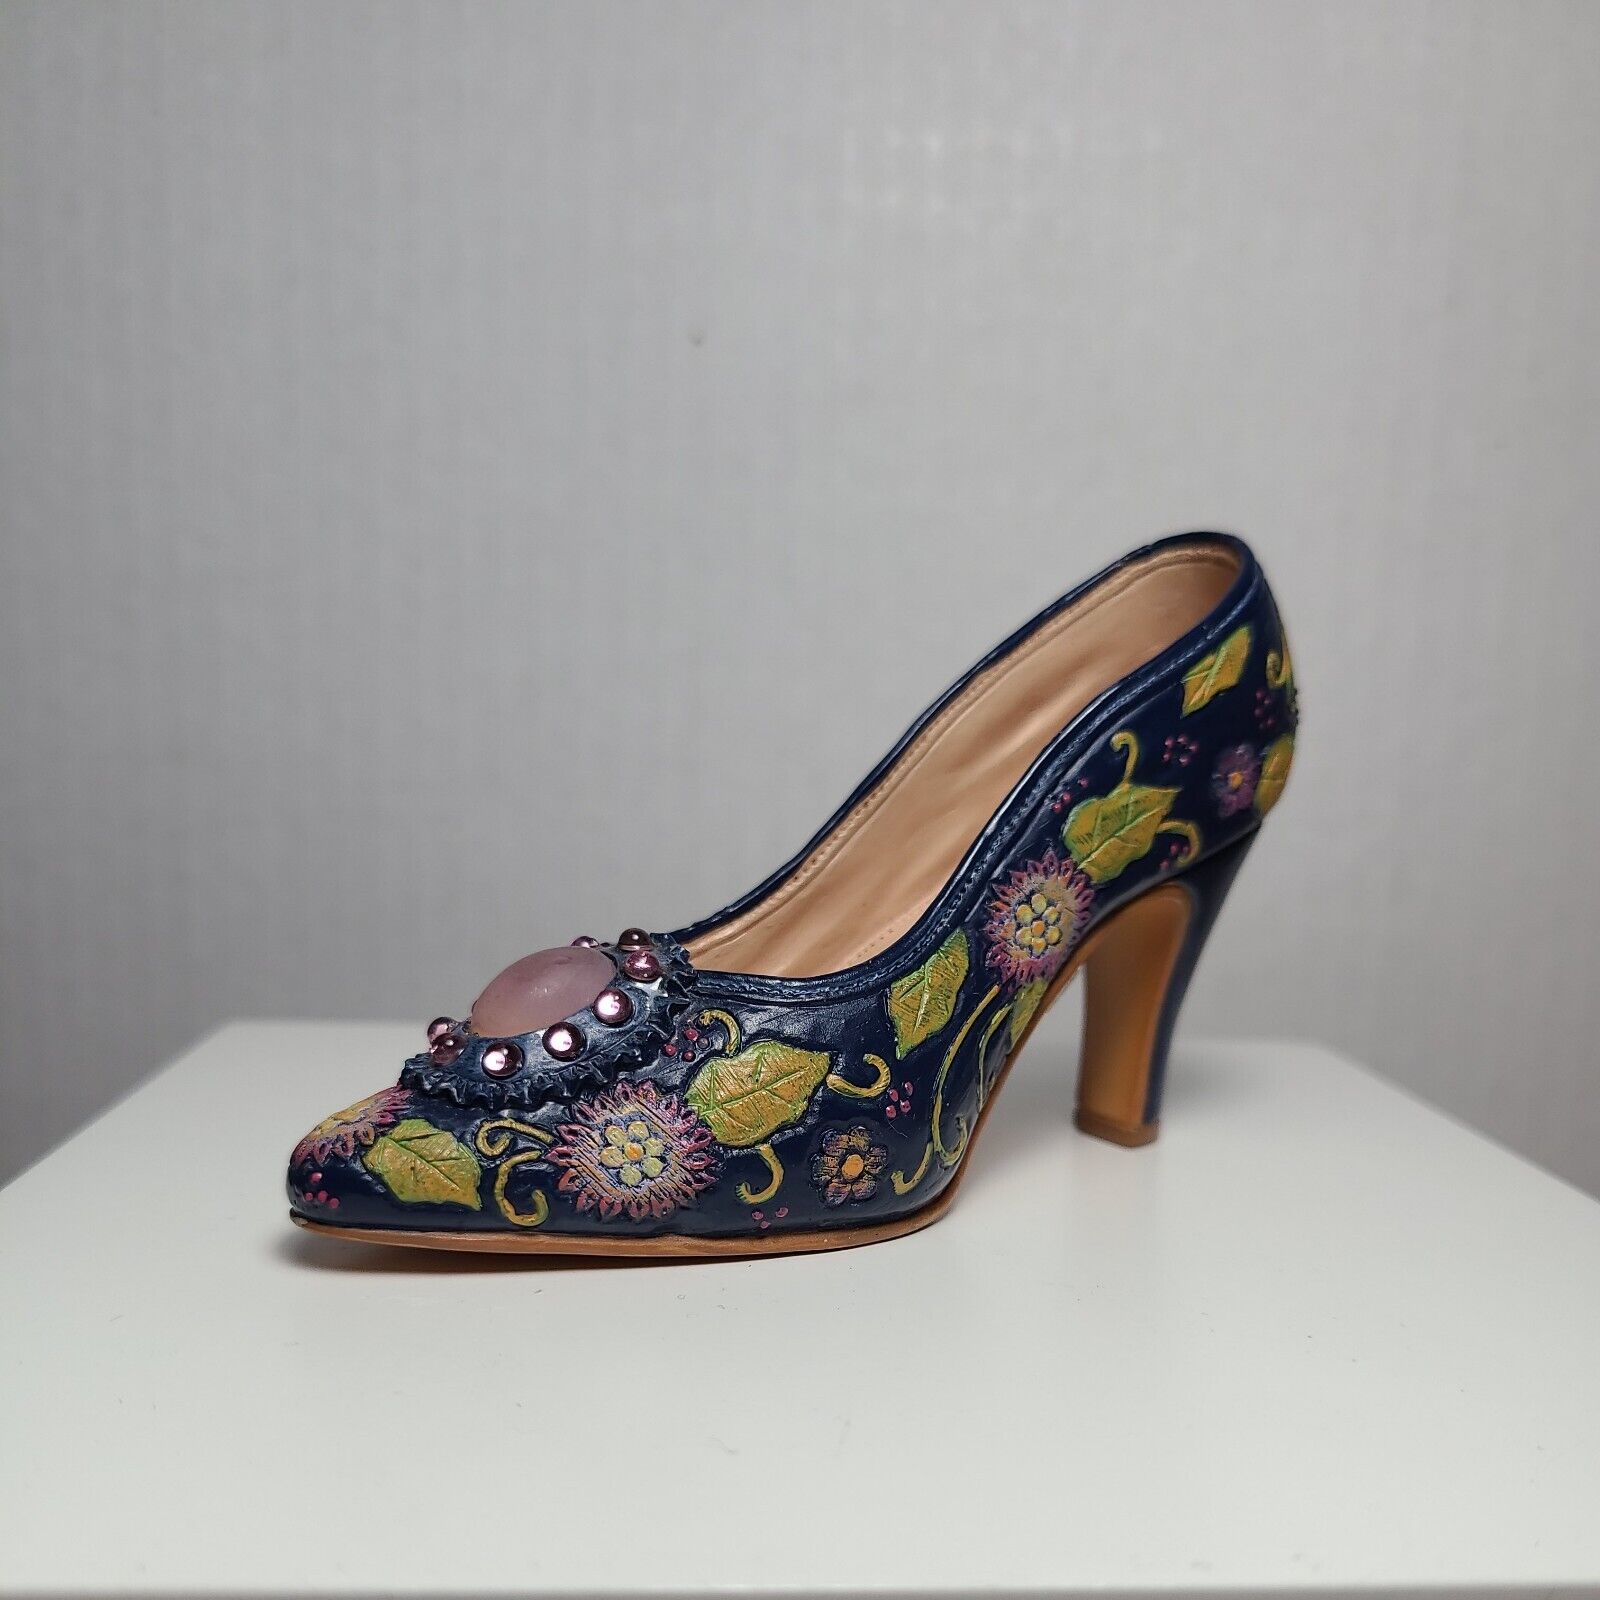 Sarna Charmed Life Mini Shoe #7-35 Blue Floral 4in Pump Collectible Home Decor 